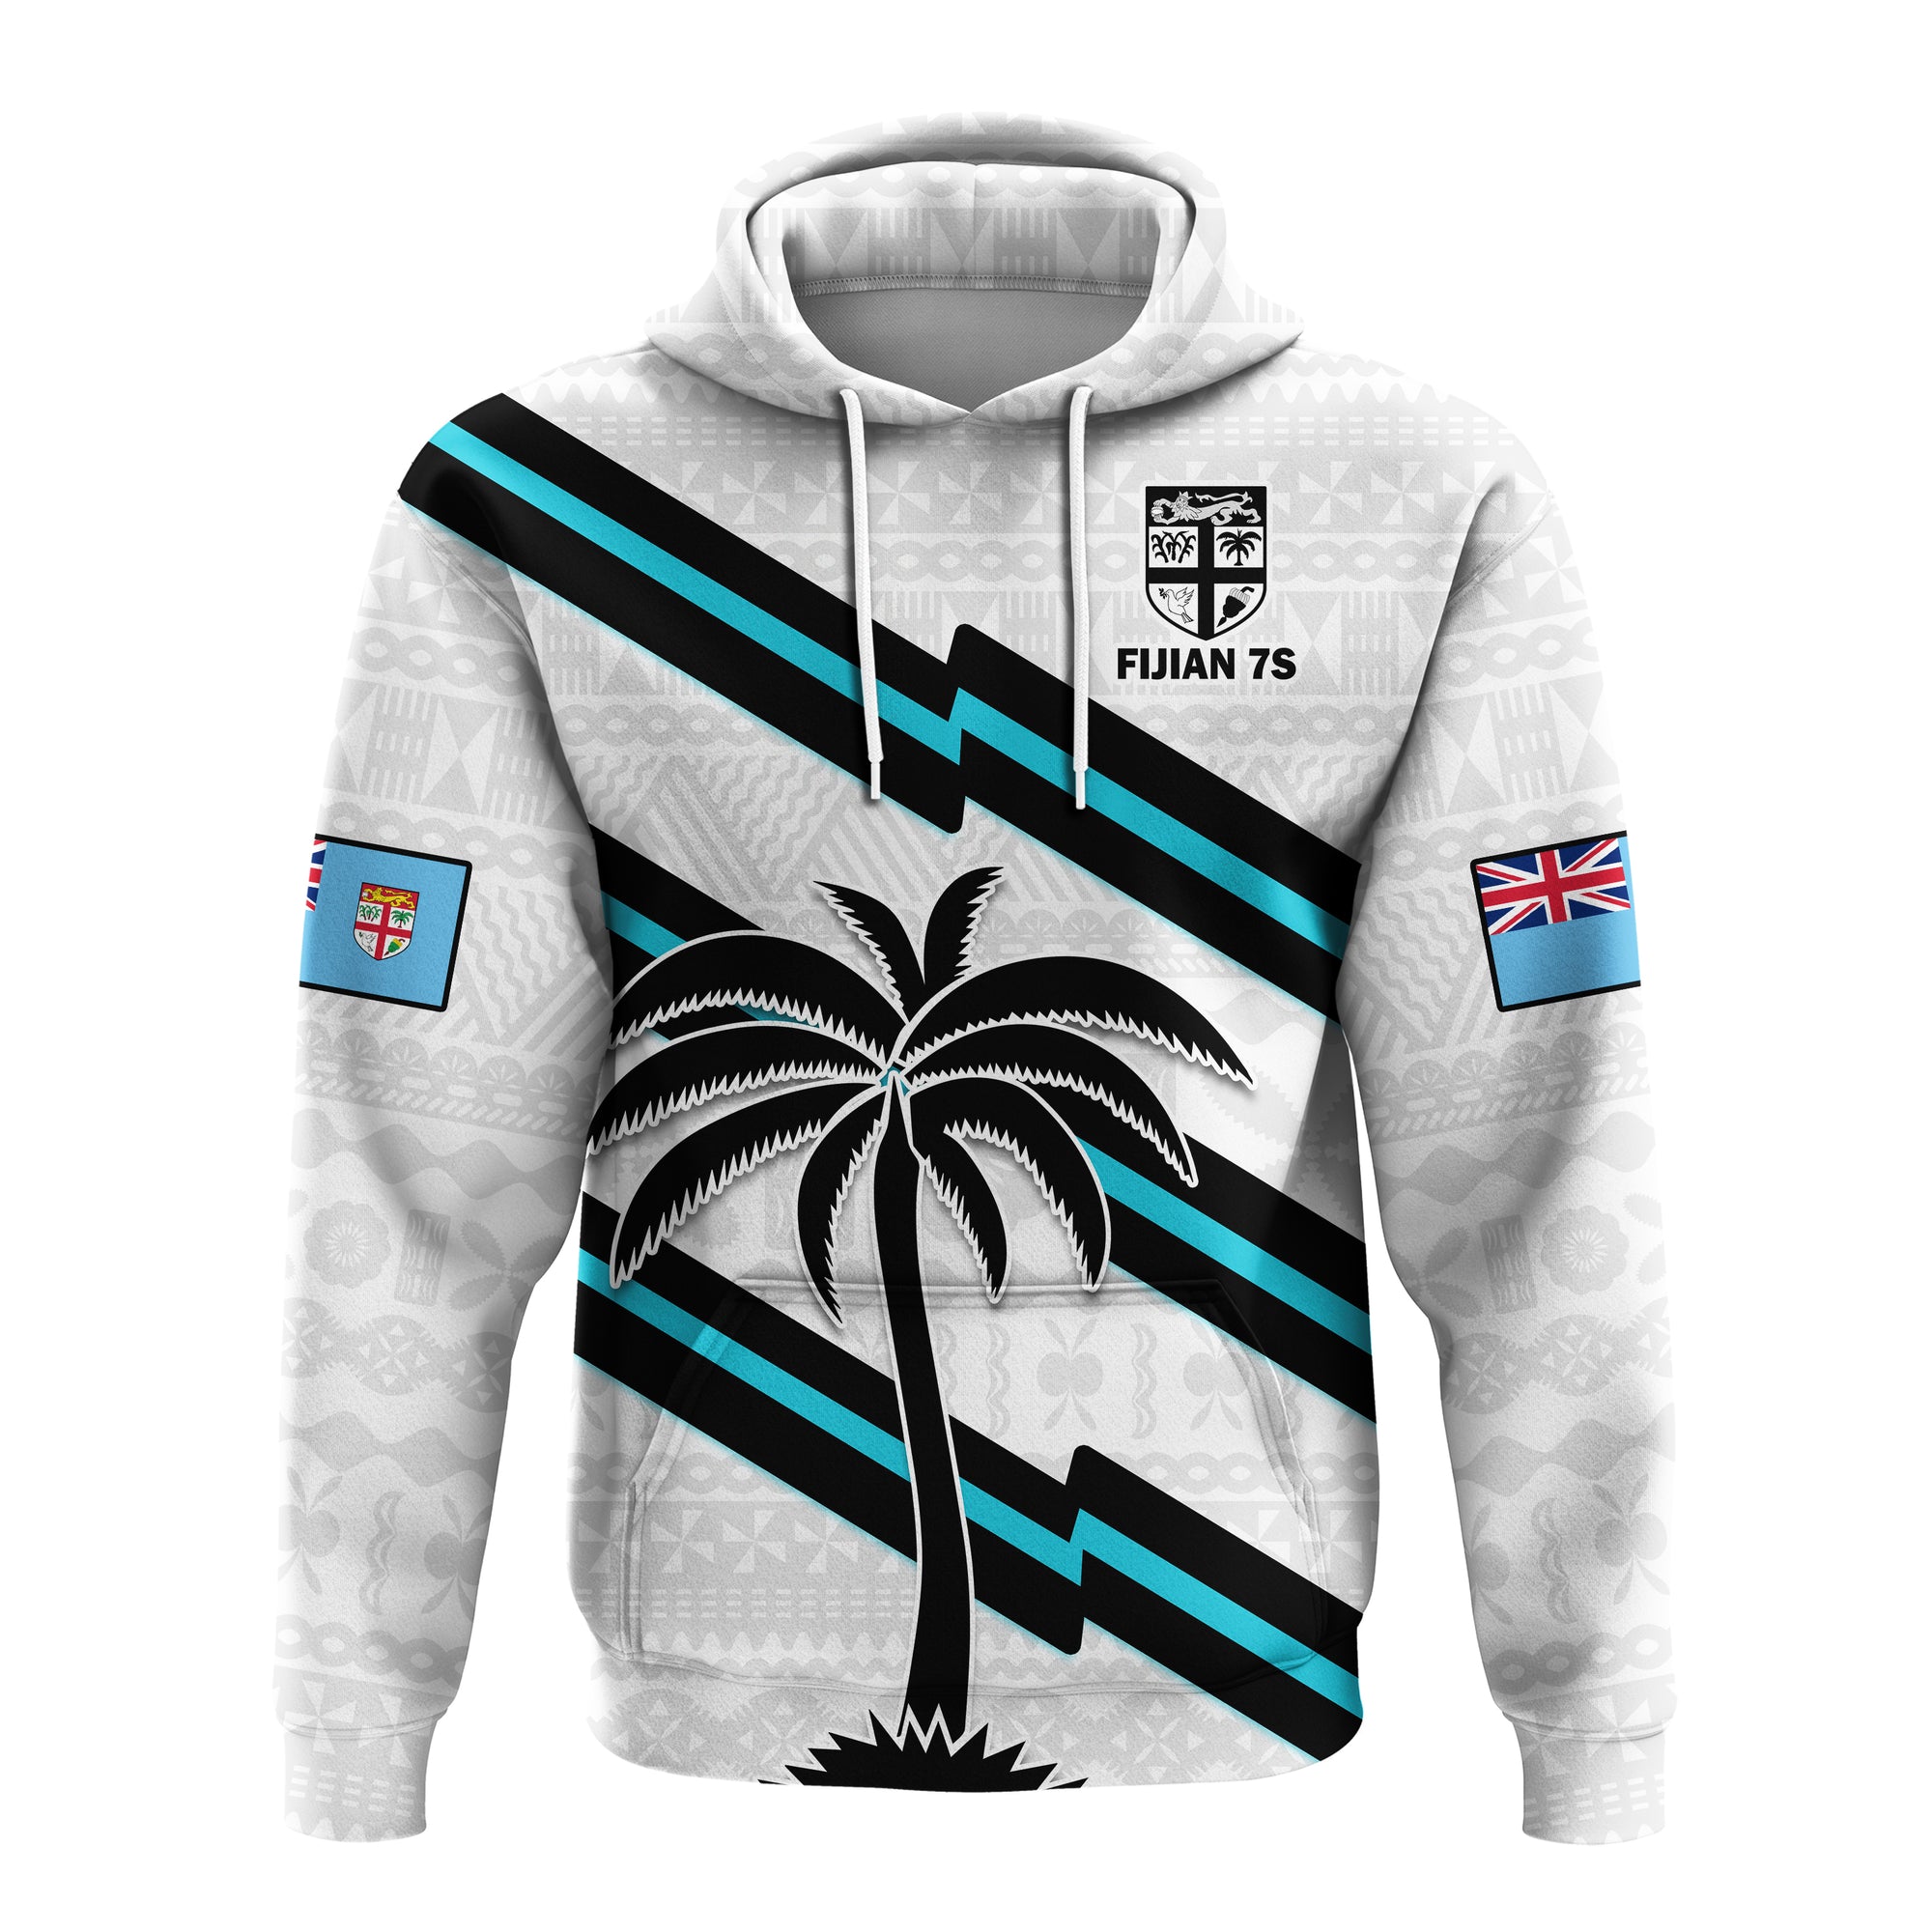 (Custom Text and Number) Fiji Rugby Tapa Pattern Fijian 7s White Hoodie LT14 Pullover Hoodie White - Polynesian Pride